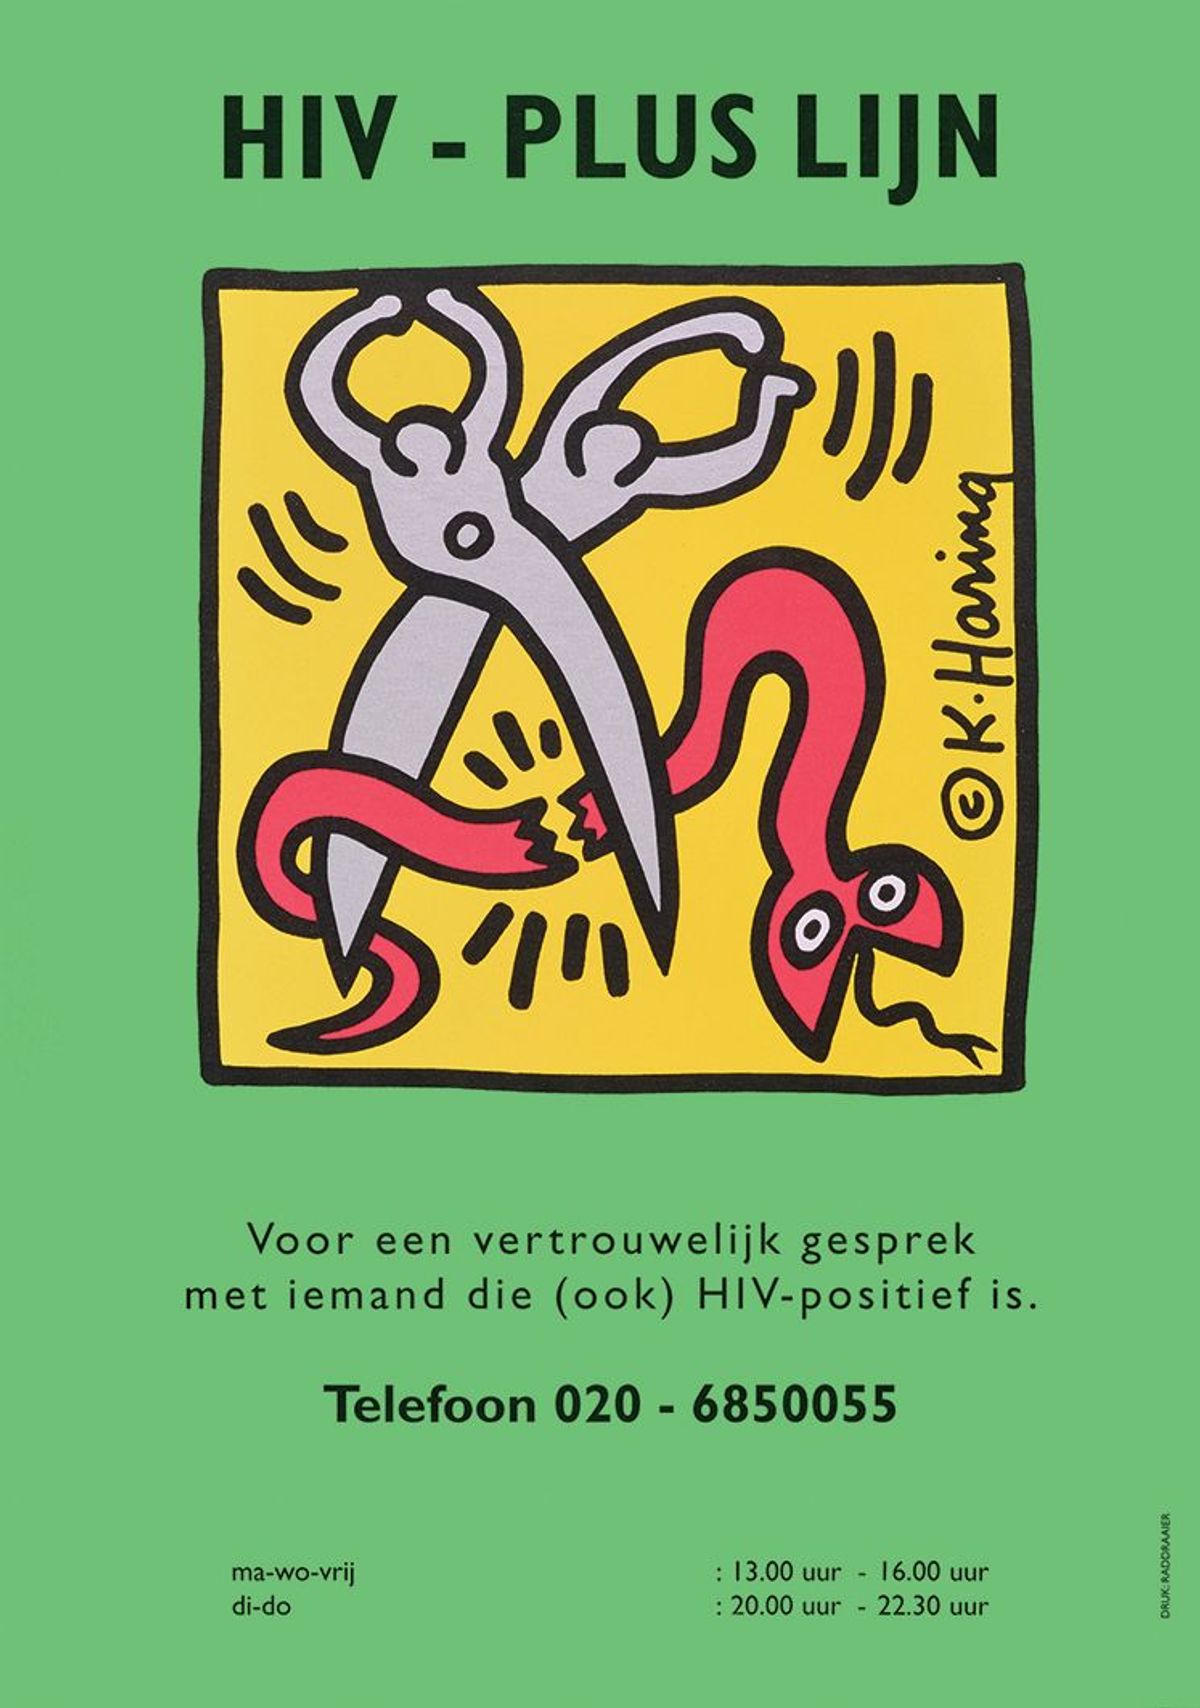 An HIV-Aids education poster, with an image by Keith Haring, appeared in the Netherlands in 1990 